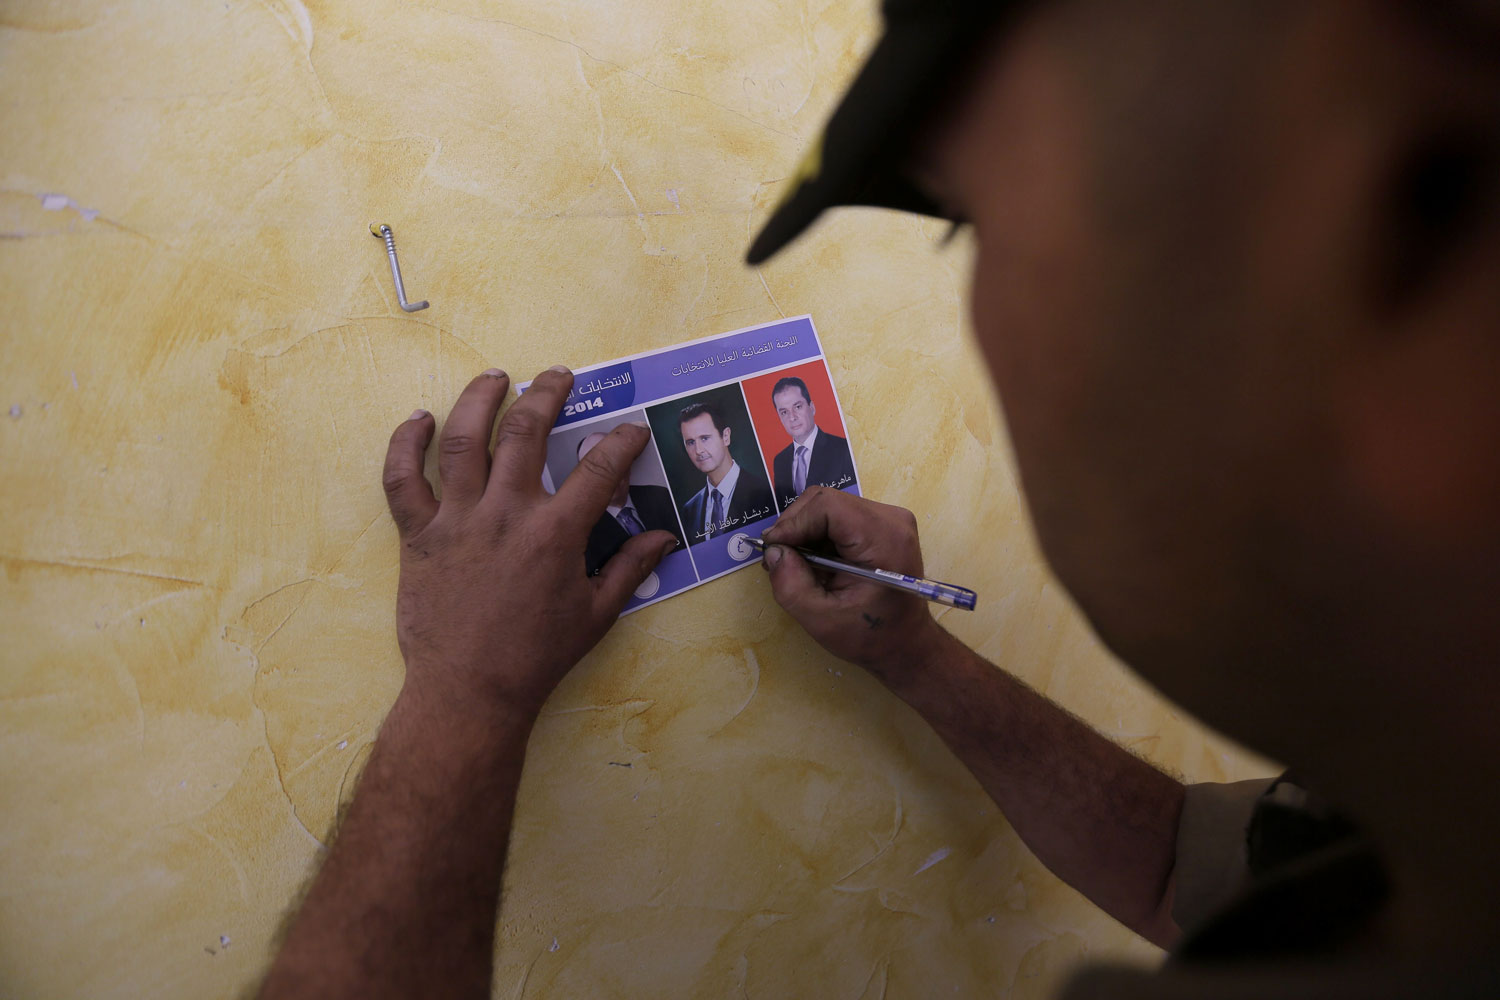 A Syrian man prepares to cast his vote at a polling station at the Umm al-Zunnar church in the city of Homs, north of Damascus, on June 3, 2014.